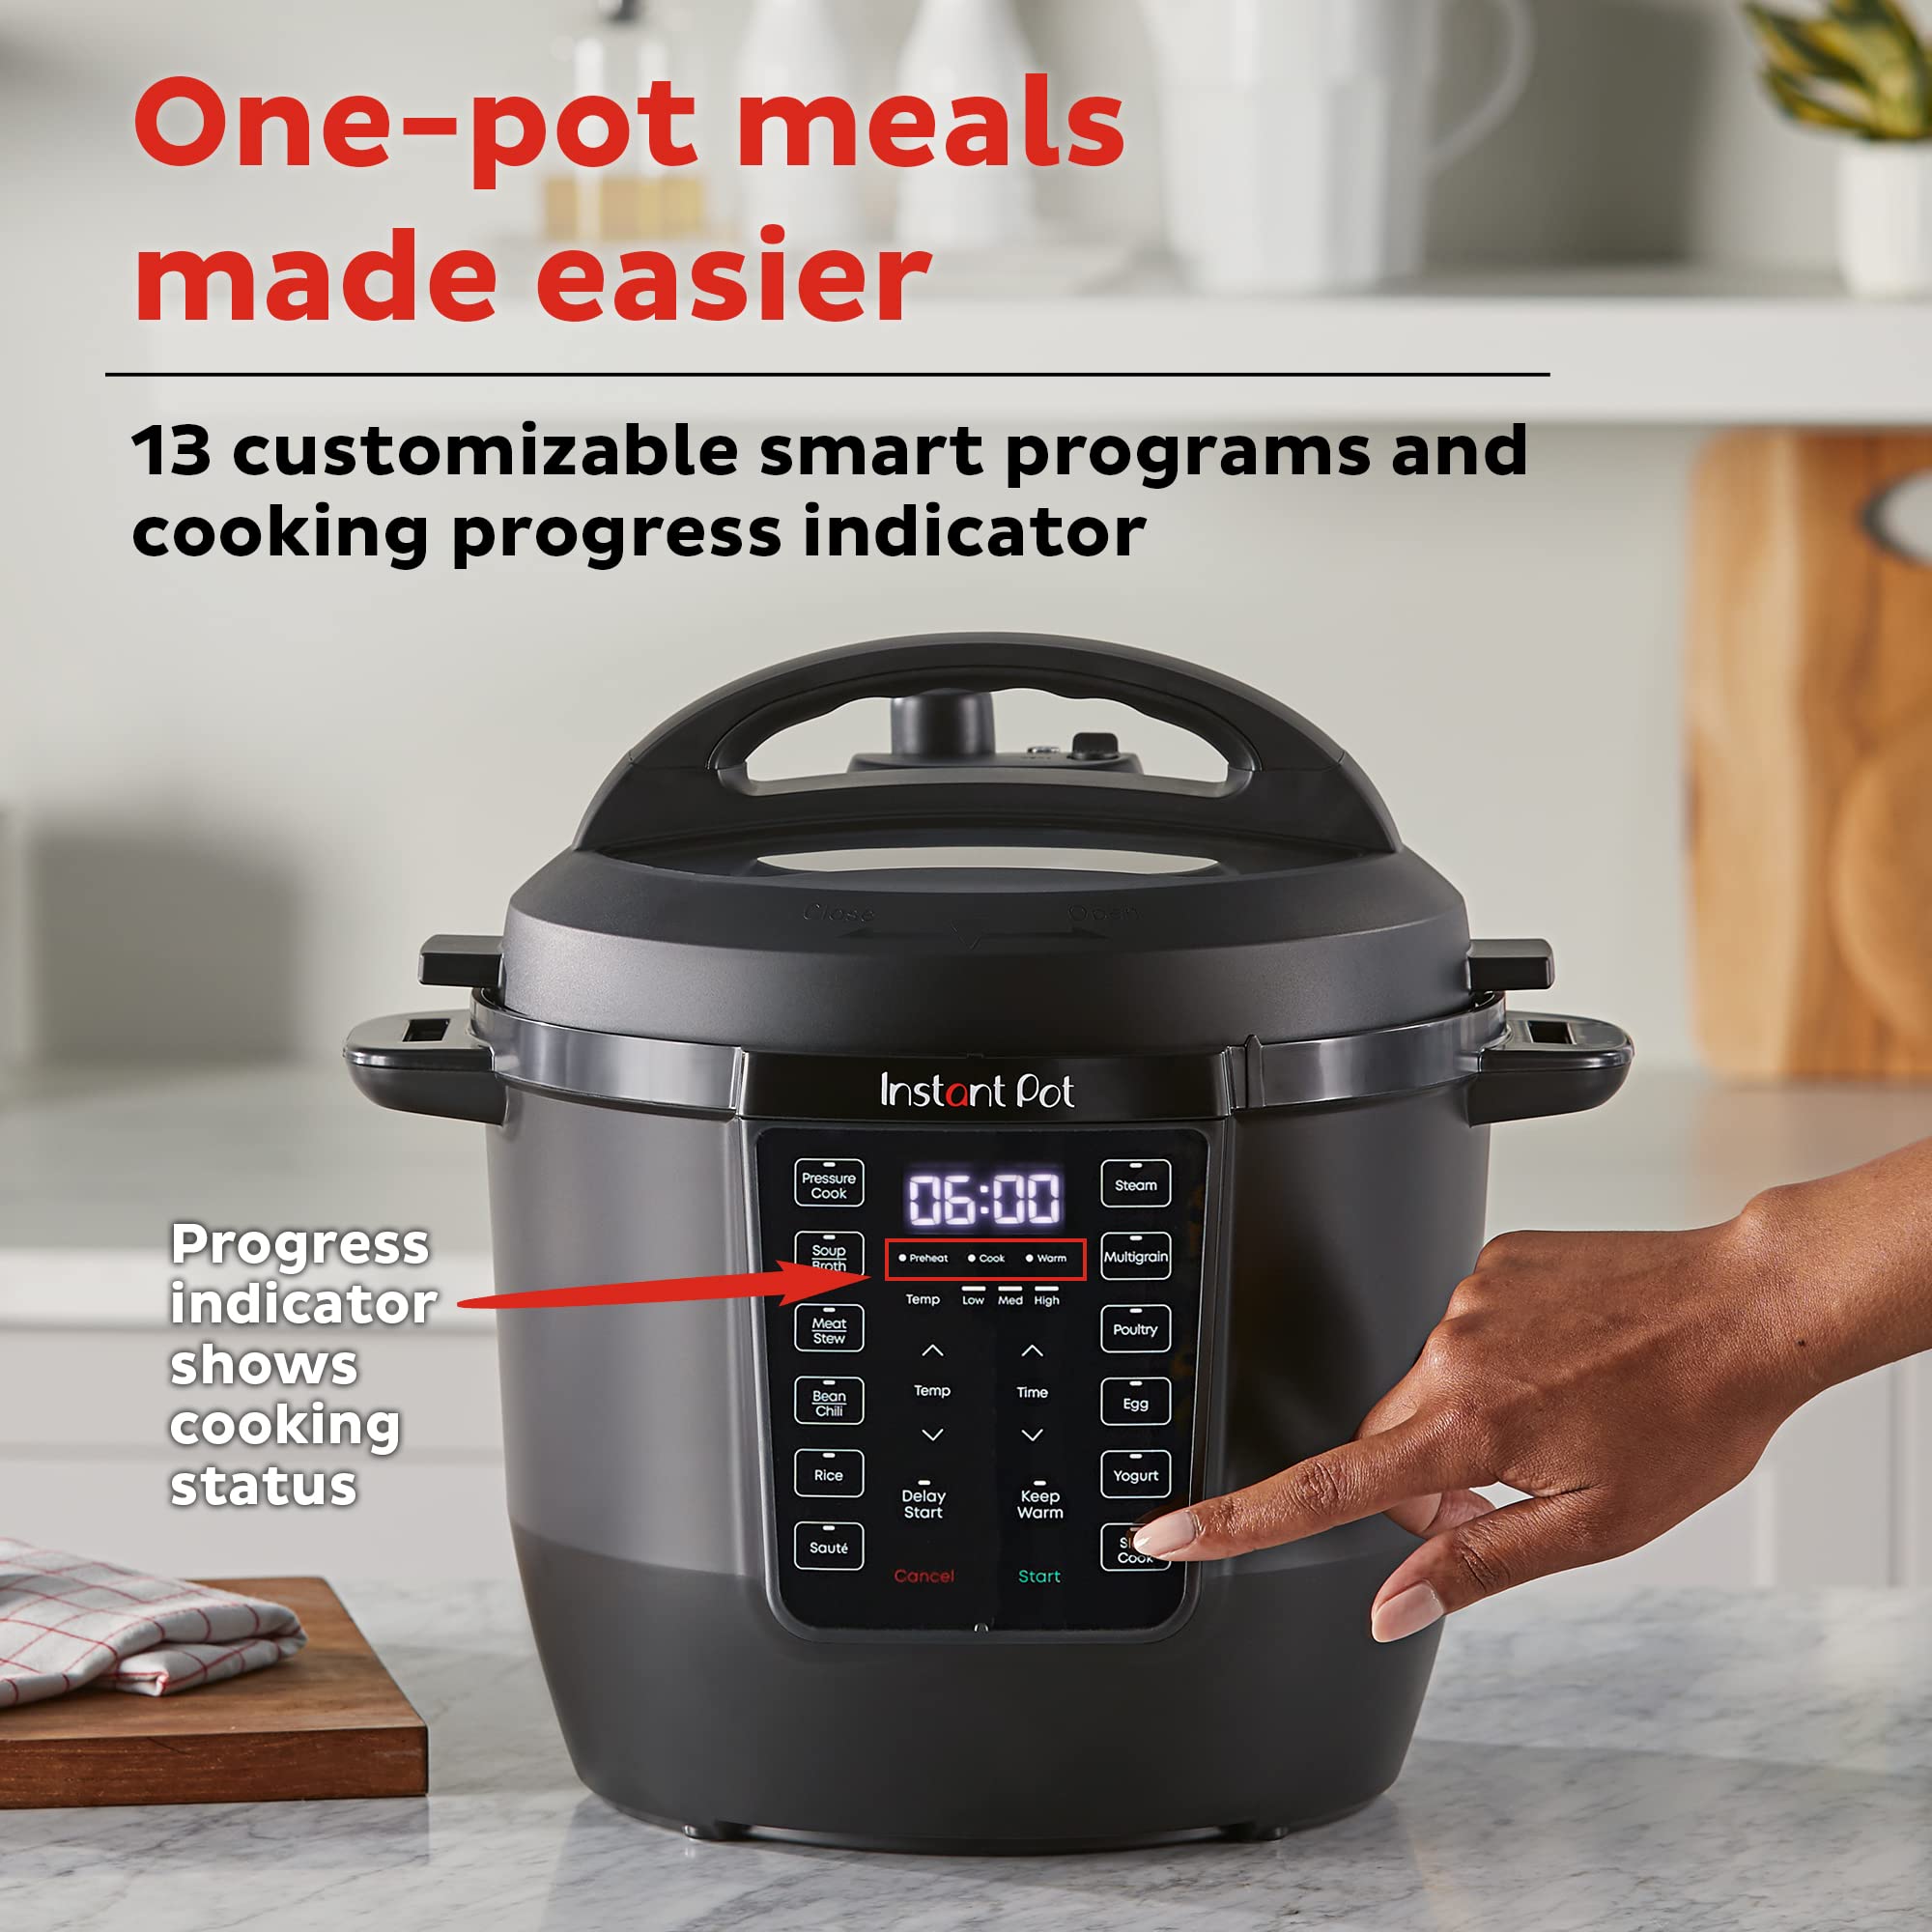 Instant Pot RIO, Formerly Known as Duo, 7-in-1 Electric Multi-Cooker, Pressure Cooker, Slow Cooker, Rice Cooker, Steamer, Sauté, Yogurt Maker, & Warmer, Includes App With Over 800 Recipes, 6 Quart